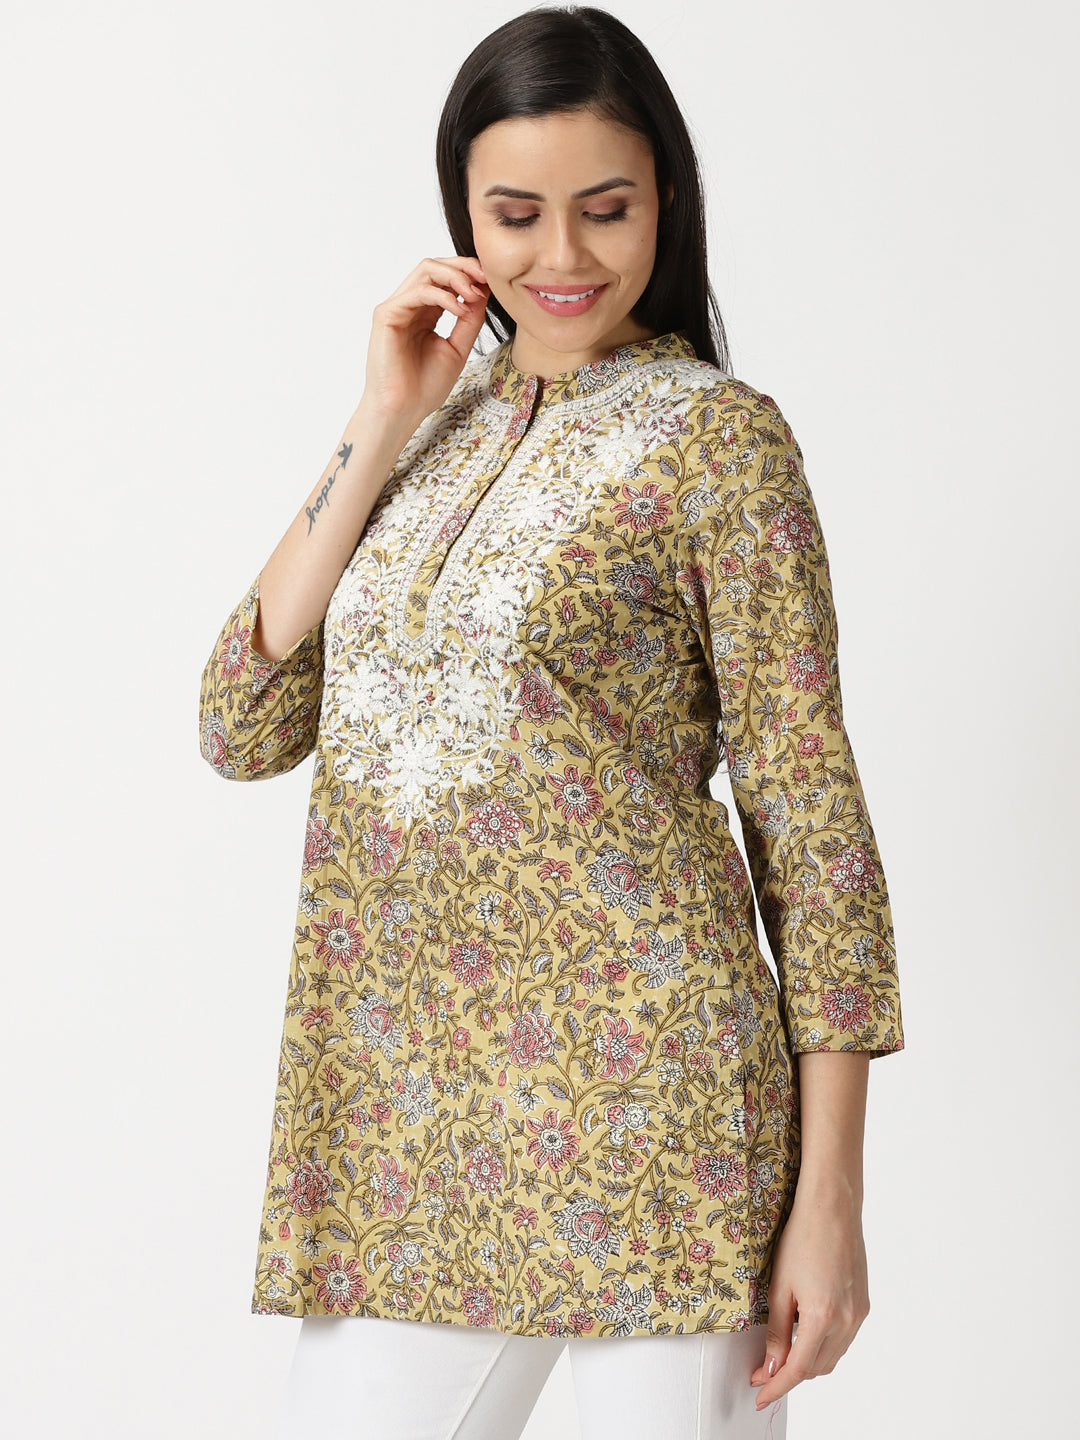 Yellow Floral Print Tunic with Lucknowi Chikankari Embroidery